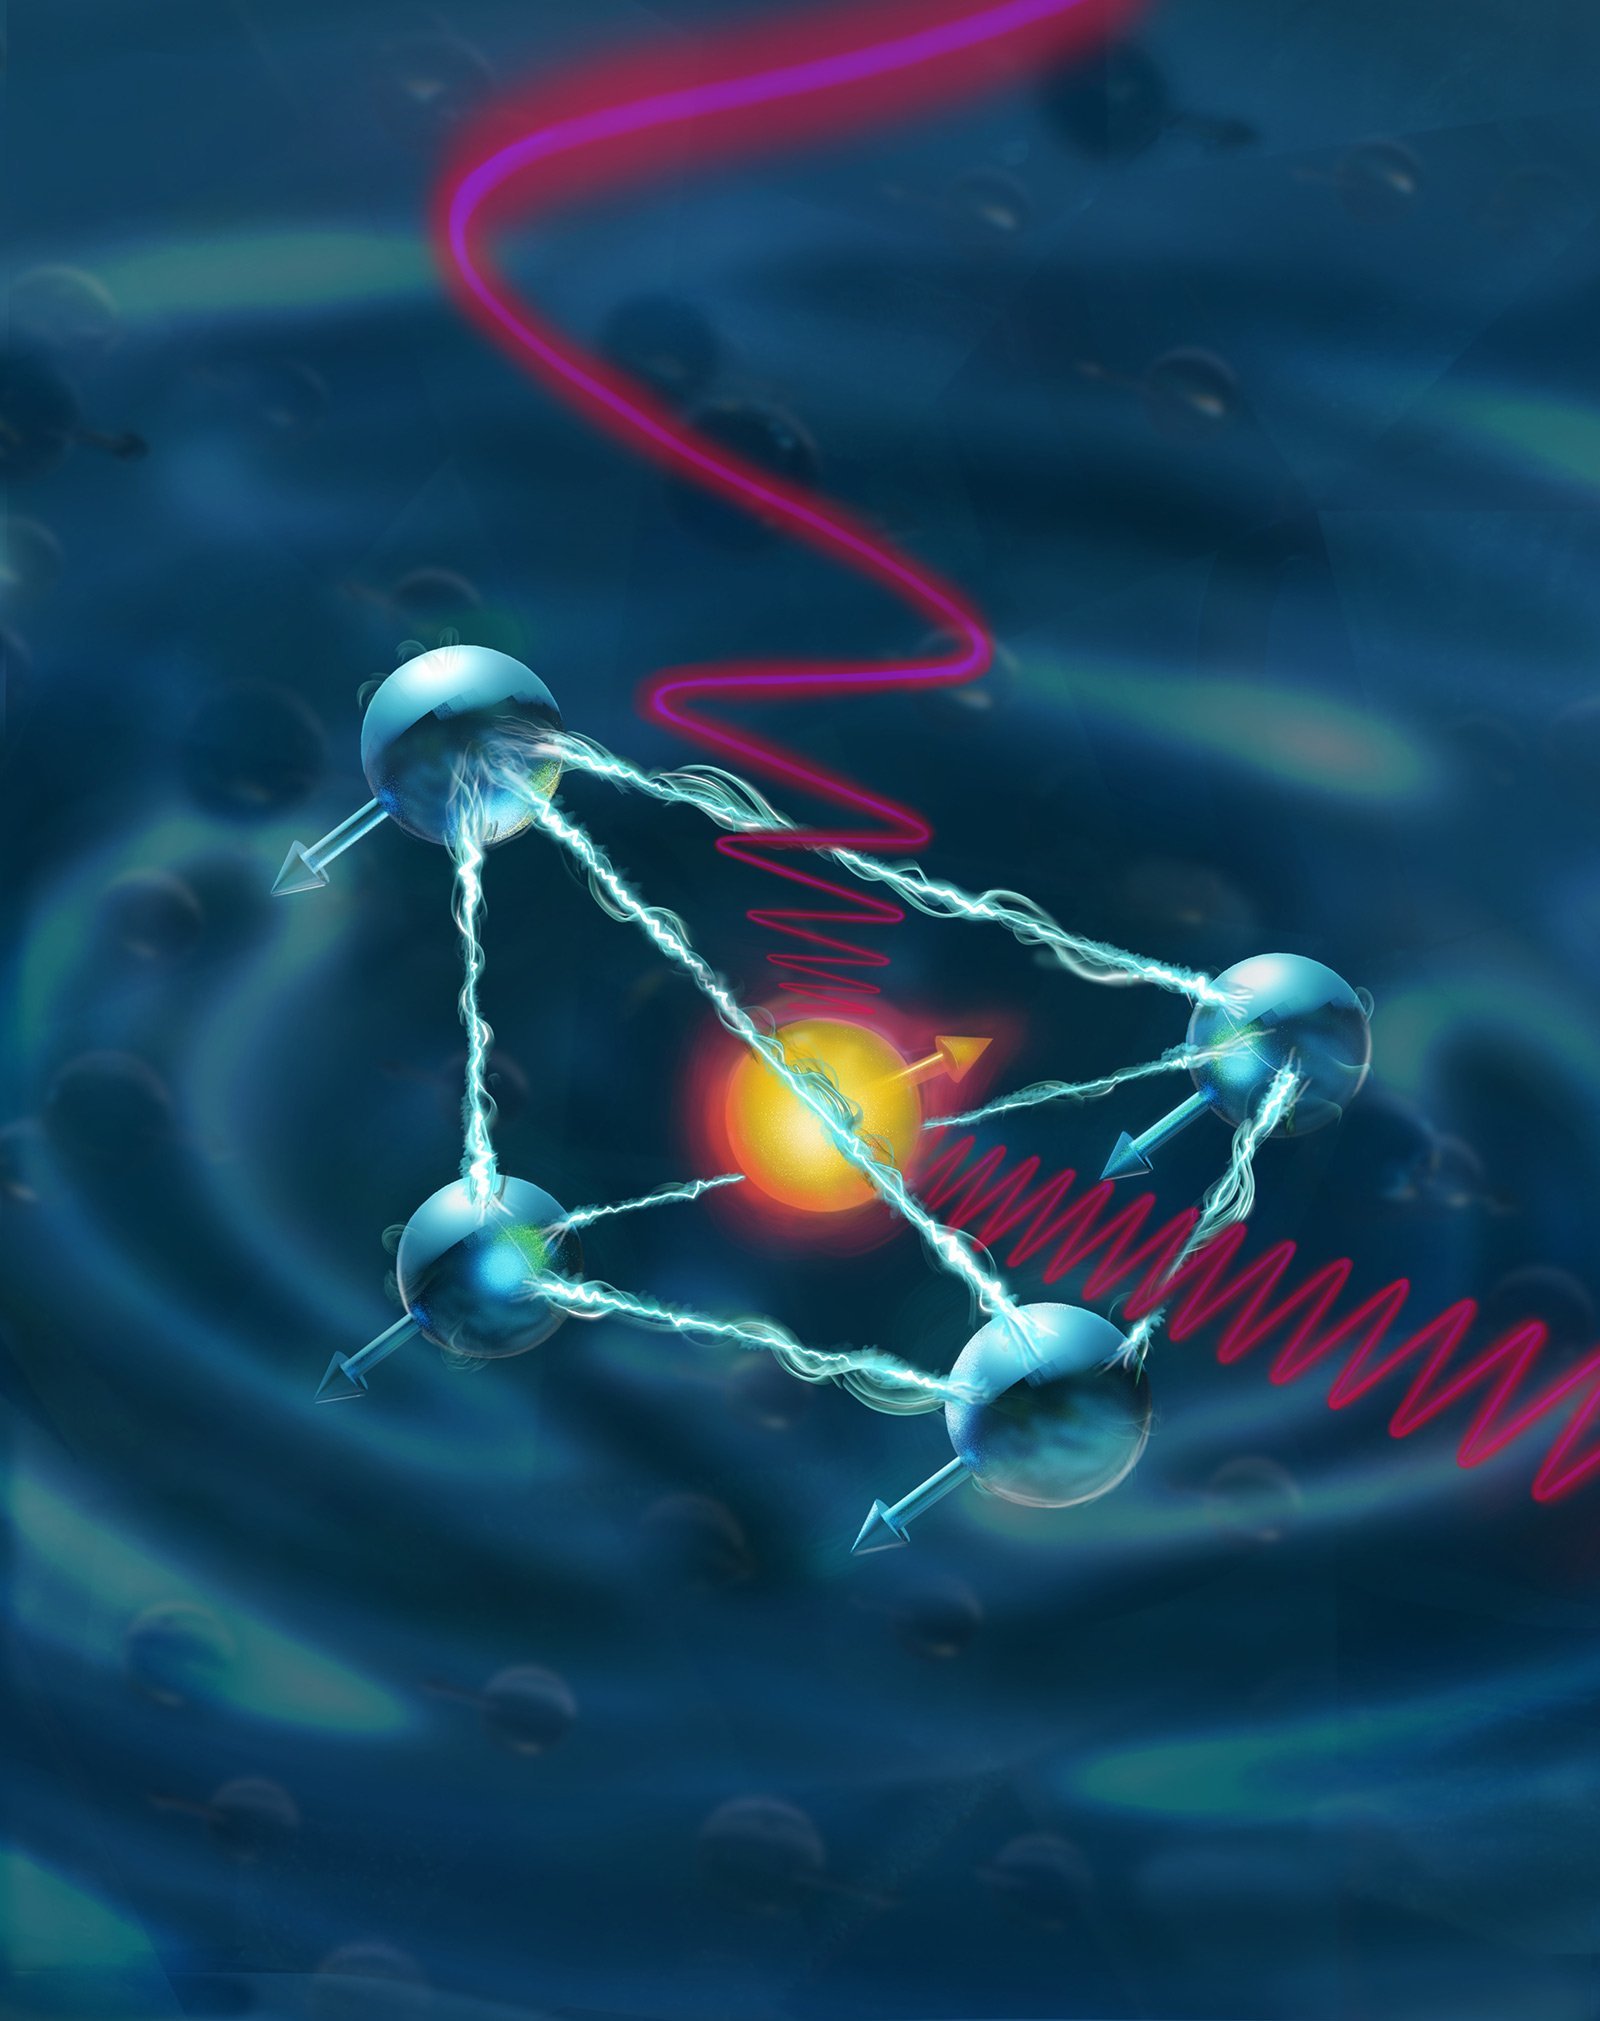 Artist's illustration depicts the quantum spin of an ytterbium ion with the surrounding yttrium orthovanadate crystal. The spin states of the atoms can be used as a processing unit (like transistors on a computer chip). By using the ytterbium to control four vanadium atoms simultaneously, the engineers were able to realize a 2-qubit processor, an important building block in the development of quantum computers and quantum networks.  (Credit: MAAYAN VISUALS)